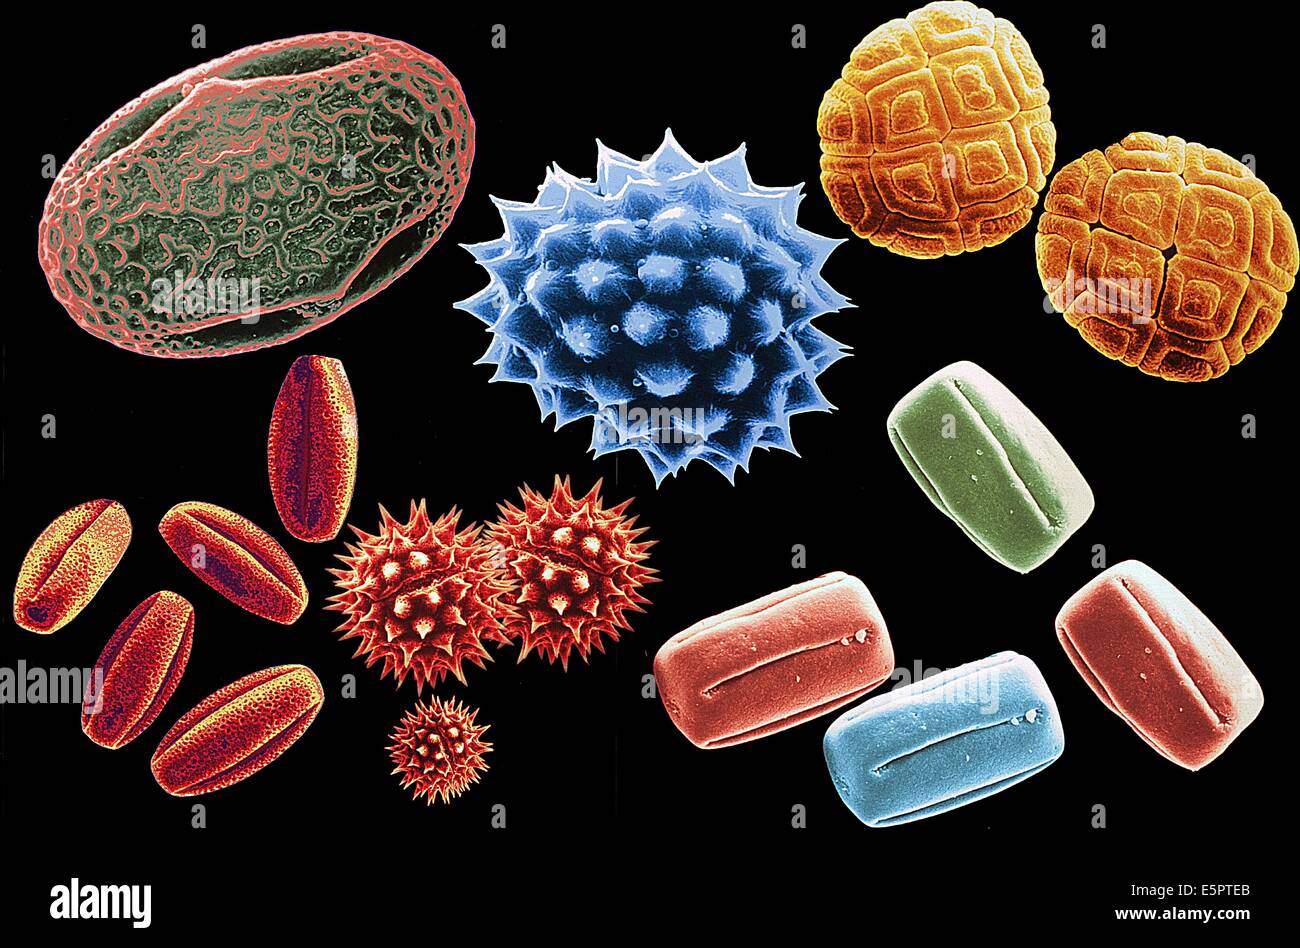 Scanning electron microscope view of differents pollens. Stock Photo